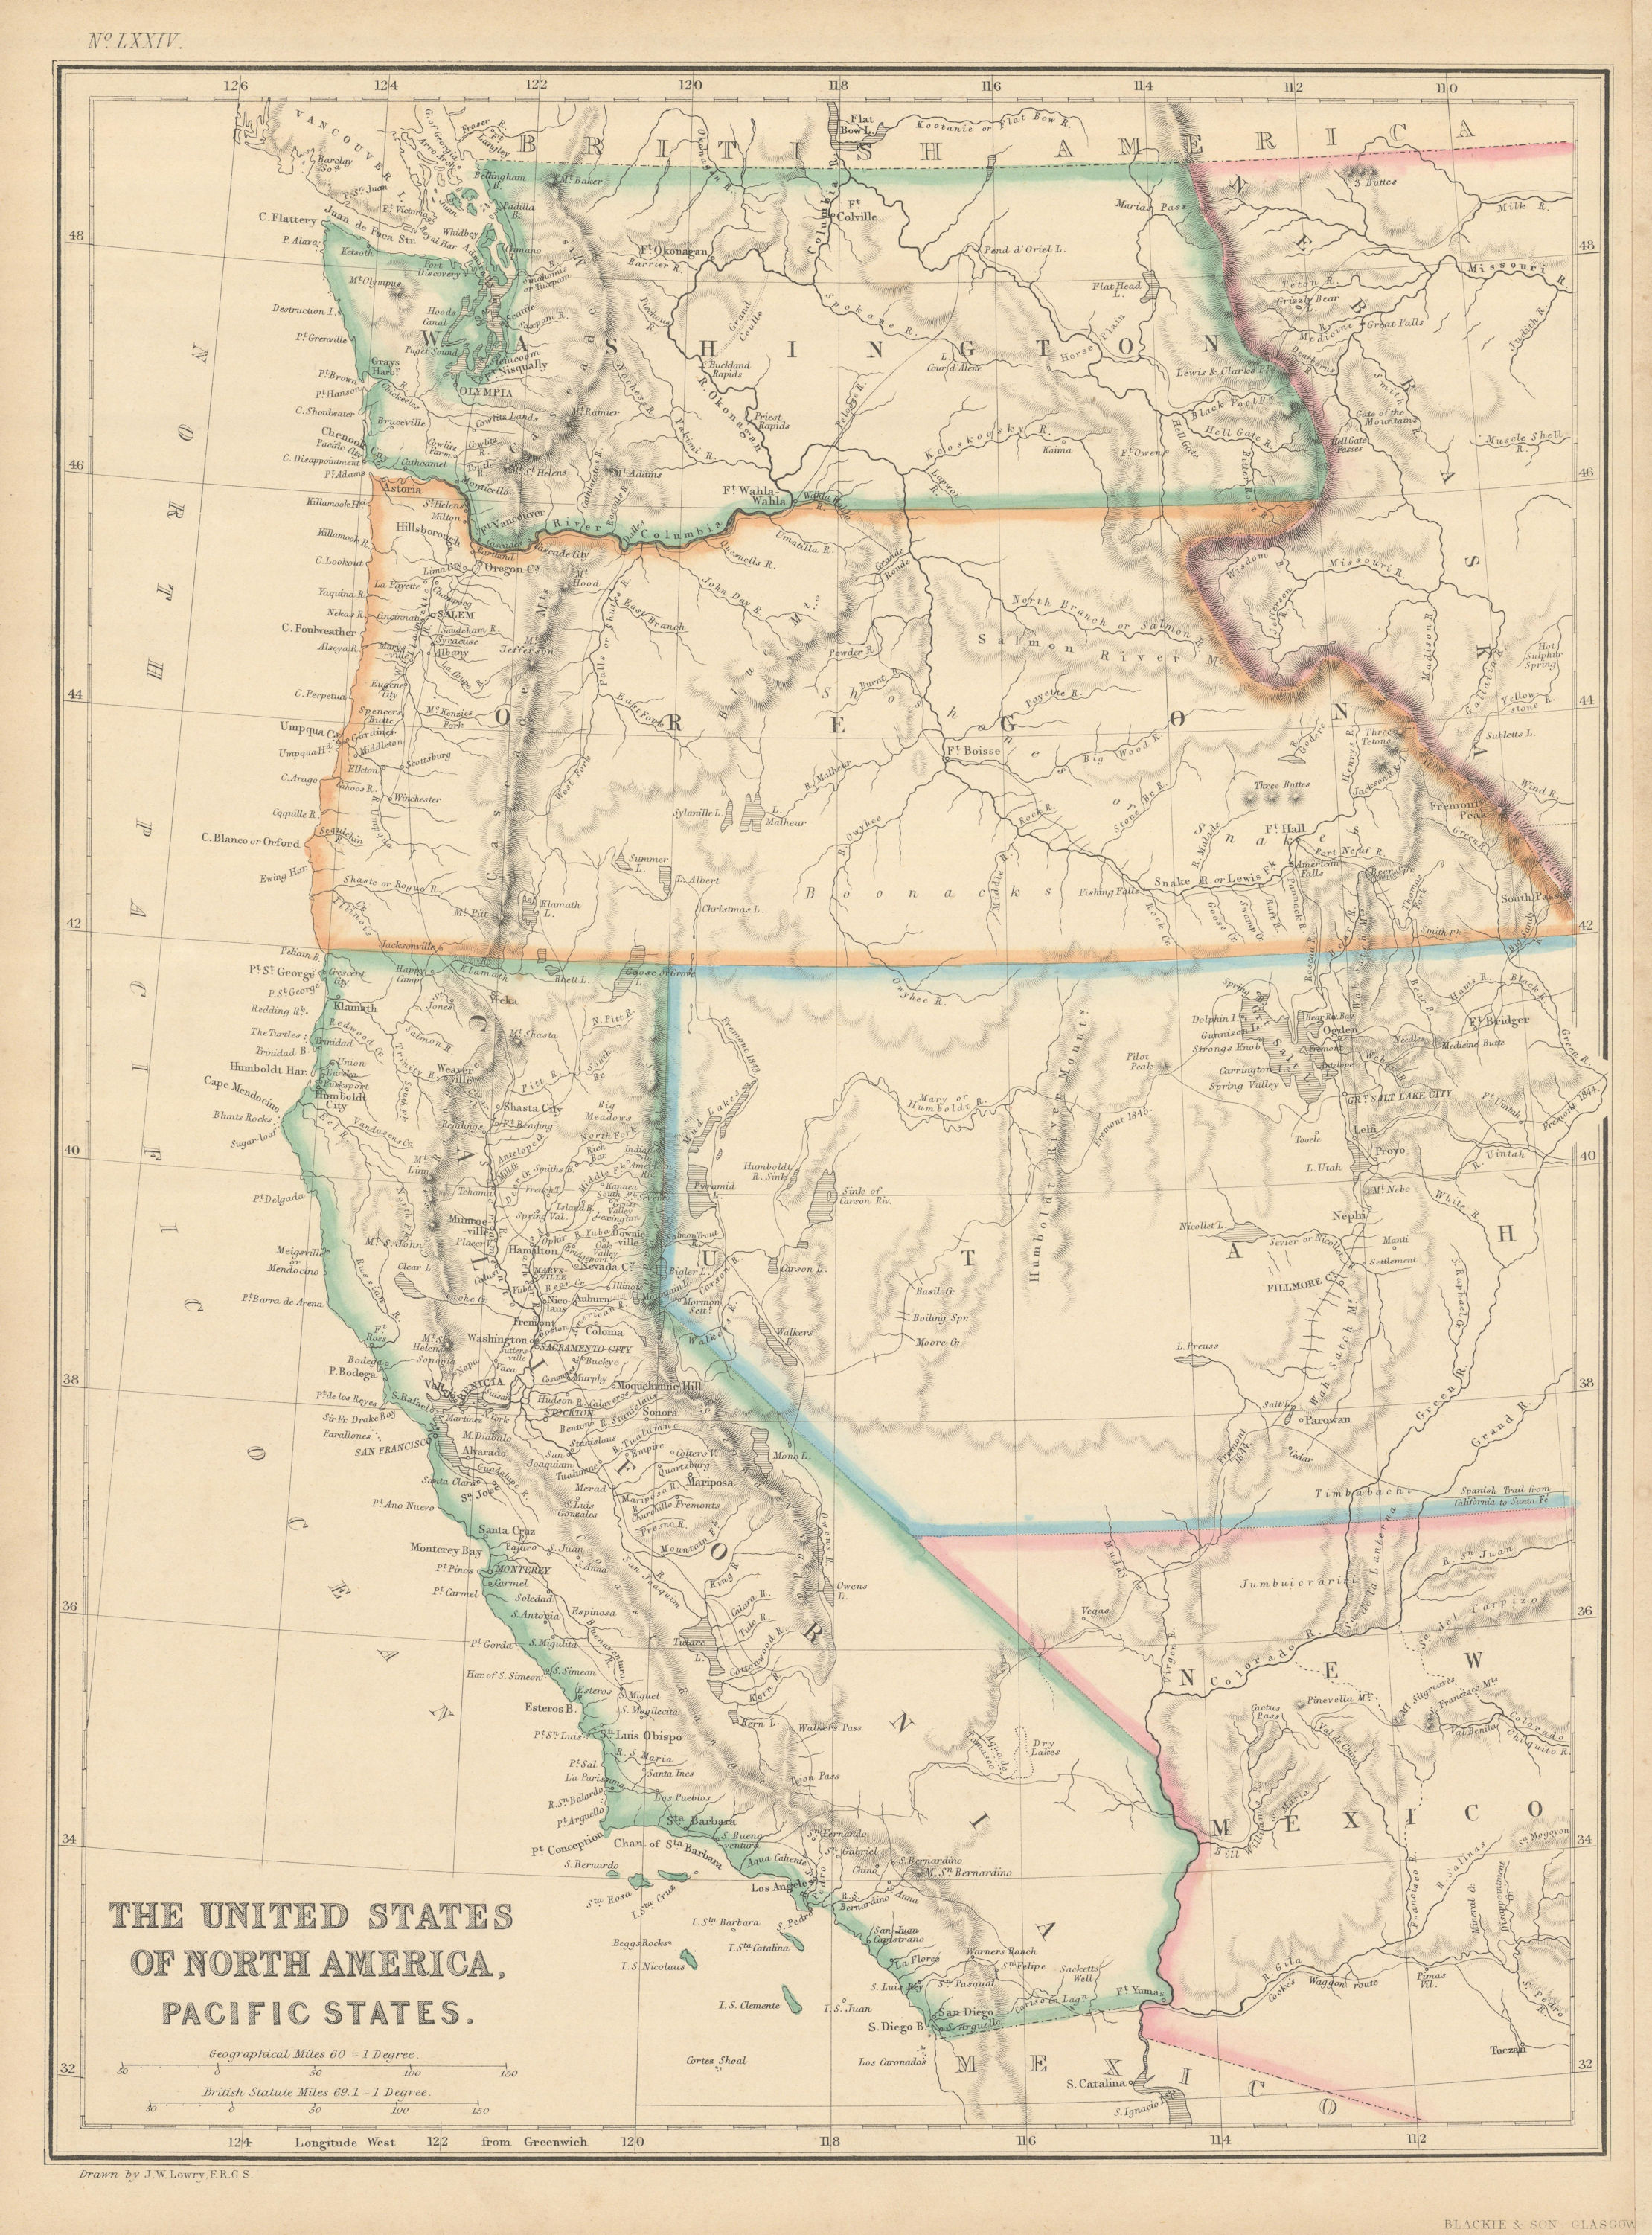 Associate Product United States of North America, Pacific States by Joseph Wilson Lowry 1860 map